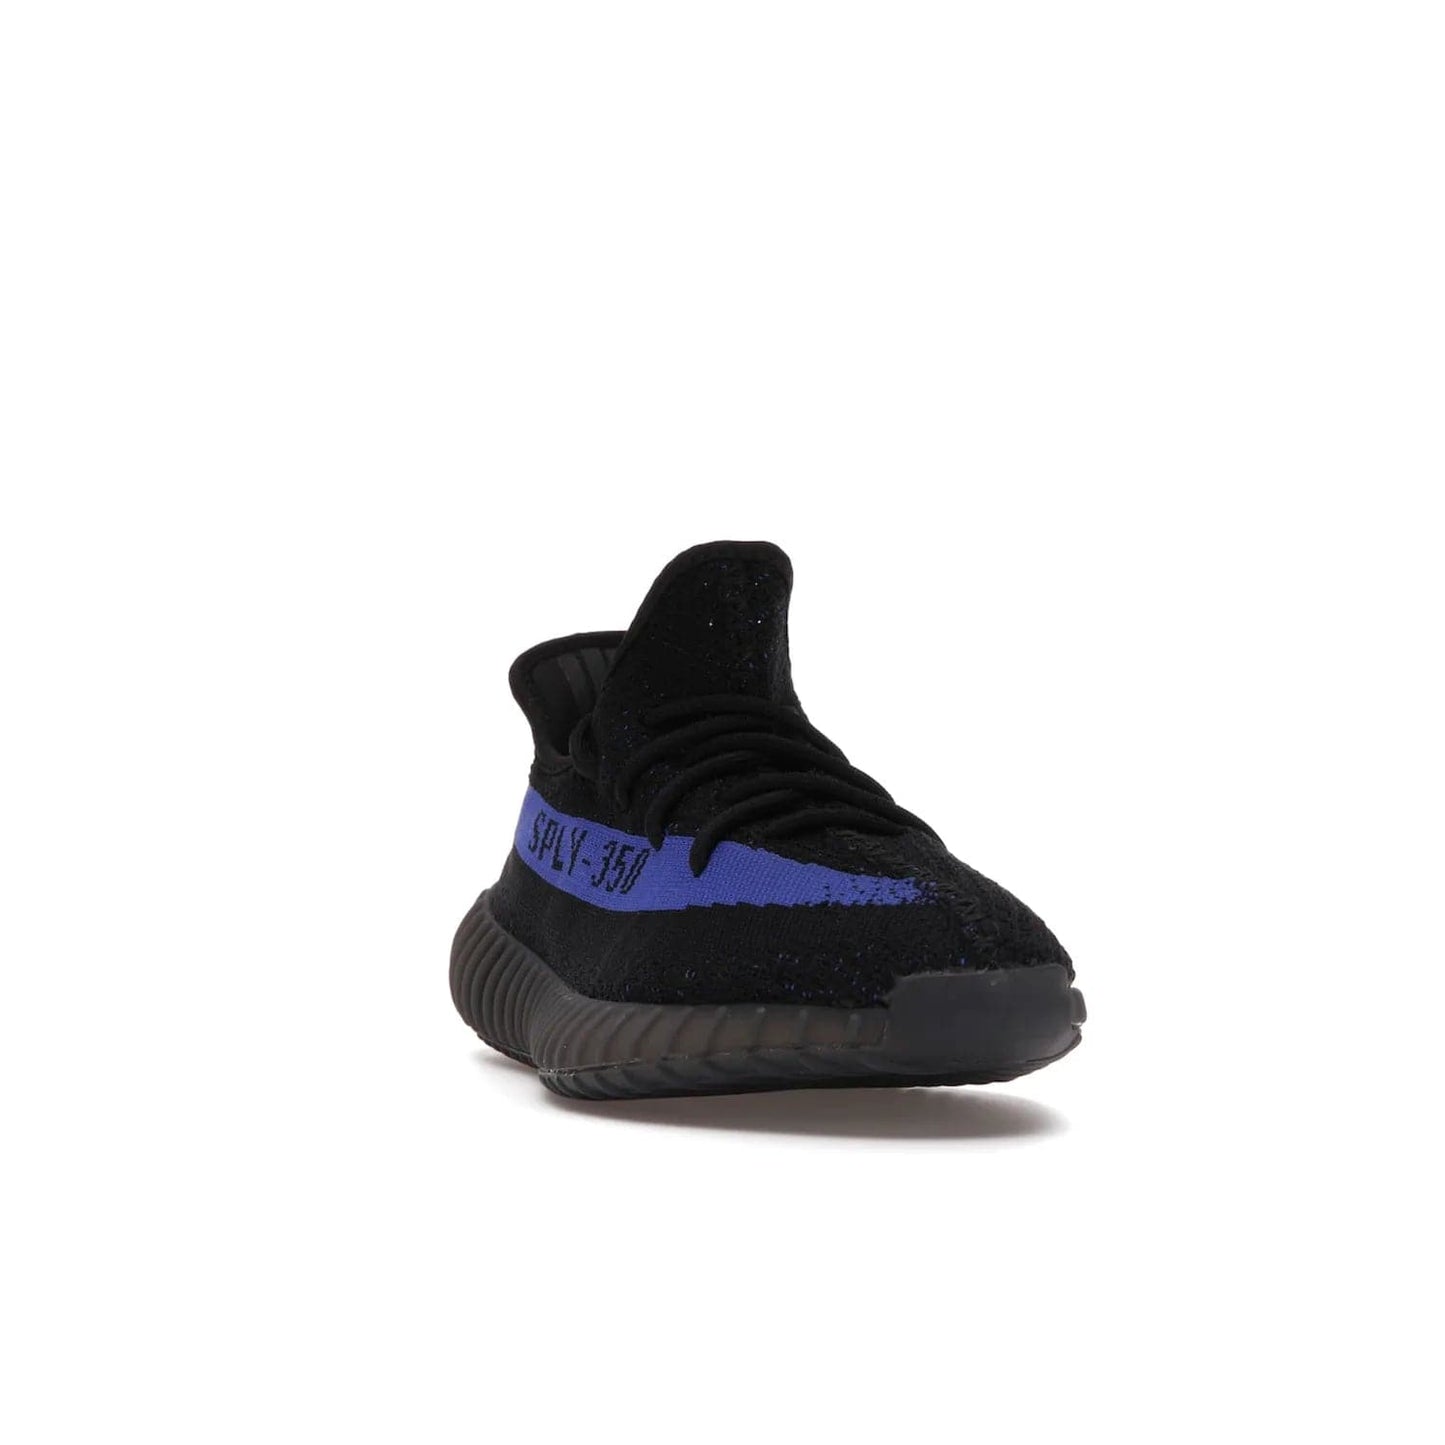 adidas Yeezy Boost 350 V2 Dazzling Blue - Image 8 - Only at www.BallersClubKickz.com - Shop the Adidas Yeezy 350 V2 Dazzling Blue, featuring a solid black Primeknit upper, Dazzling Blue side stripe, “SPLY-350” text, and a muted Boost sole. Releasing Feb 2022, this style is perfect for any shoe fan.